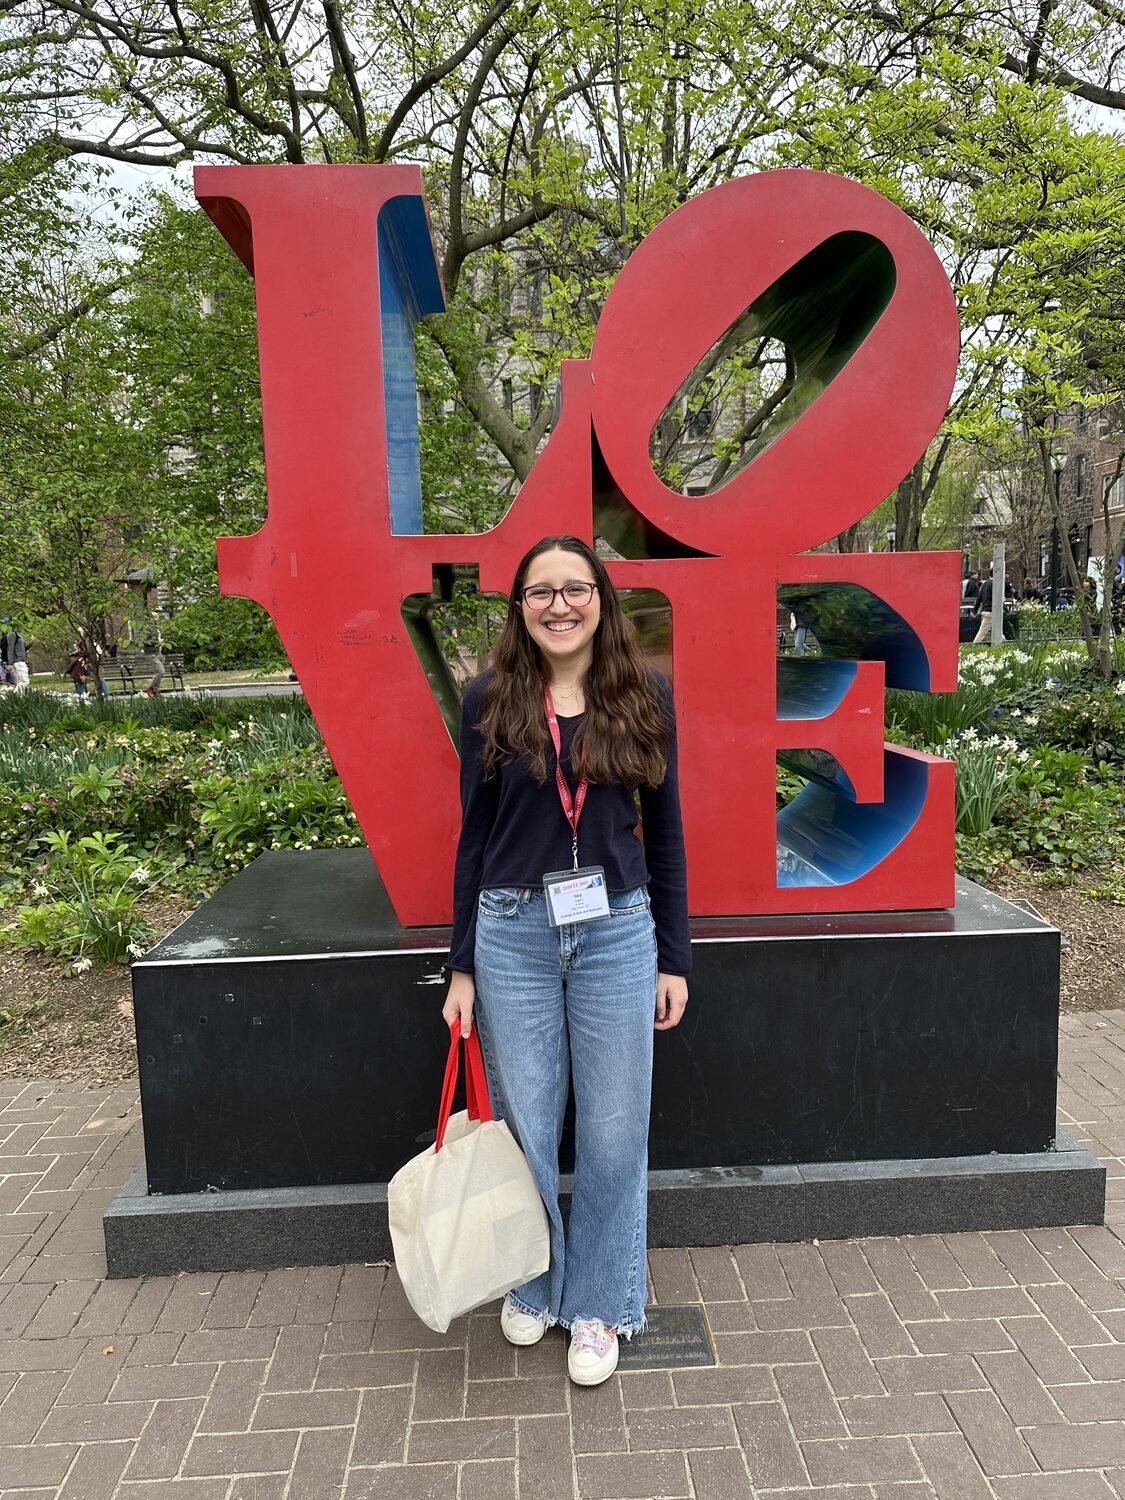 Isabelle Caplin during a visit to the University of Pennsylvania, where she is headed in the fall.